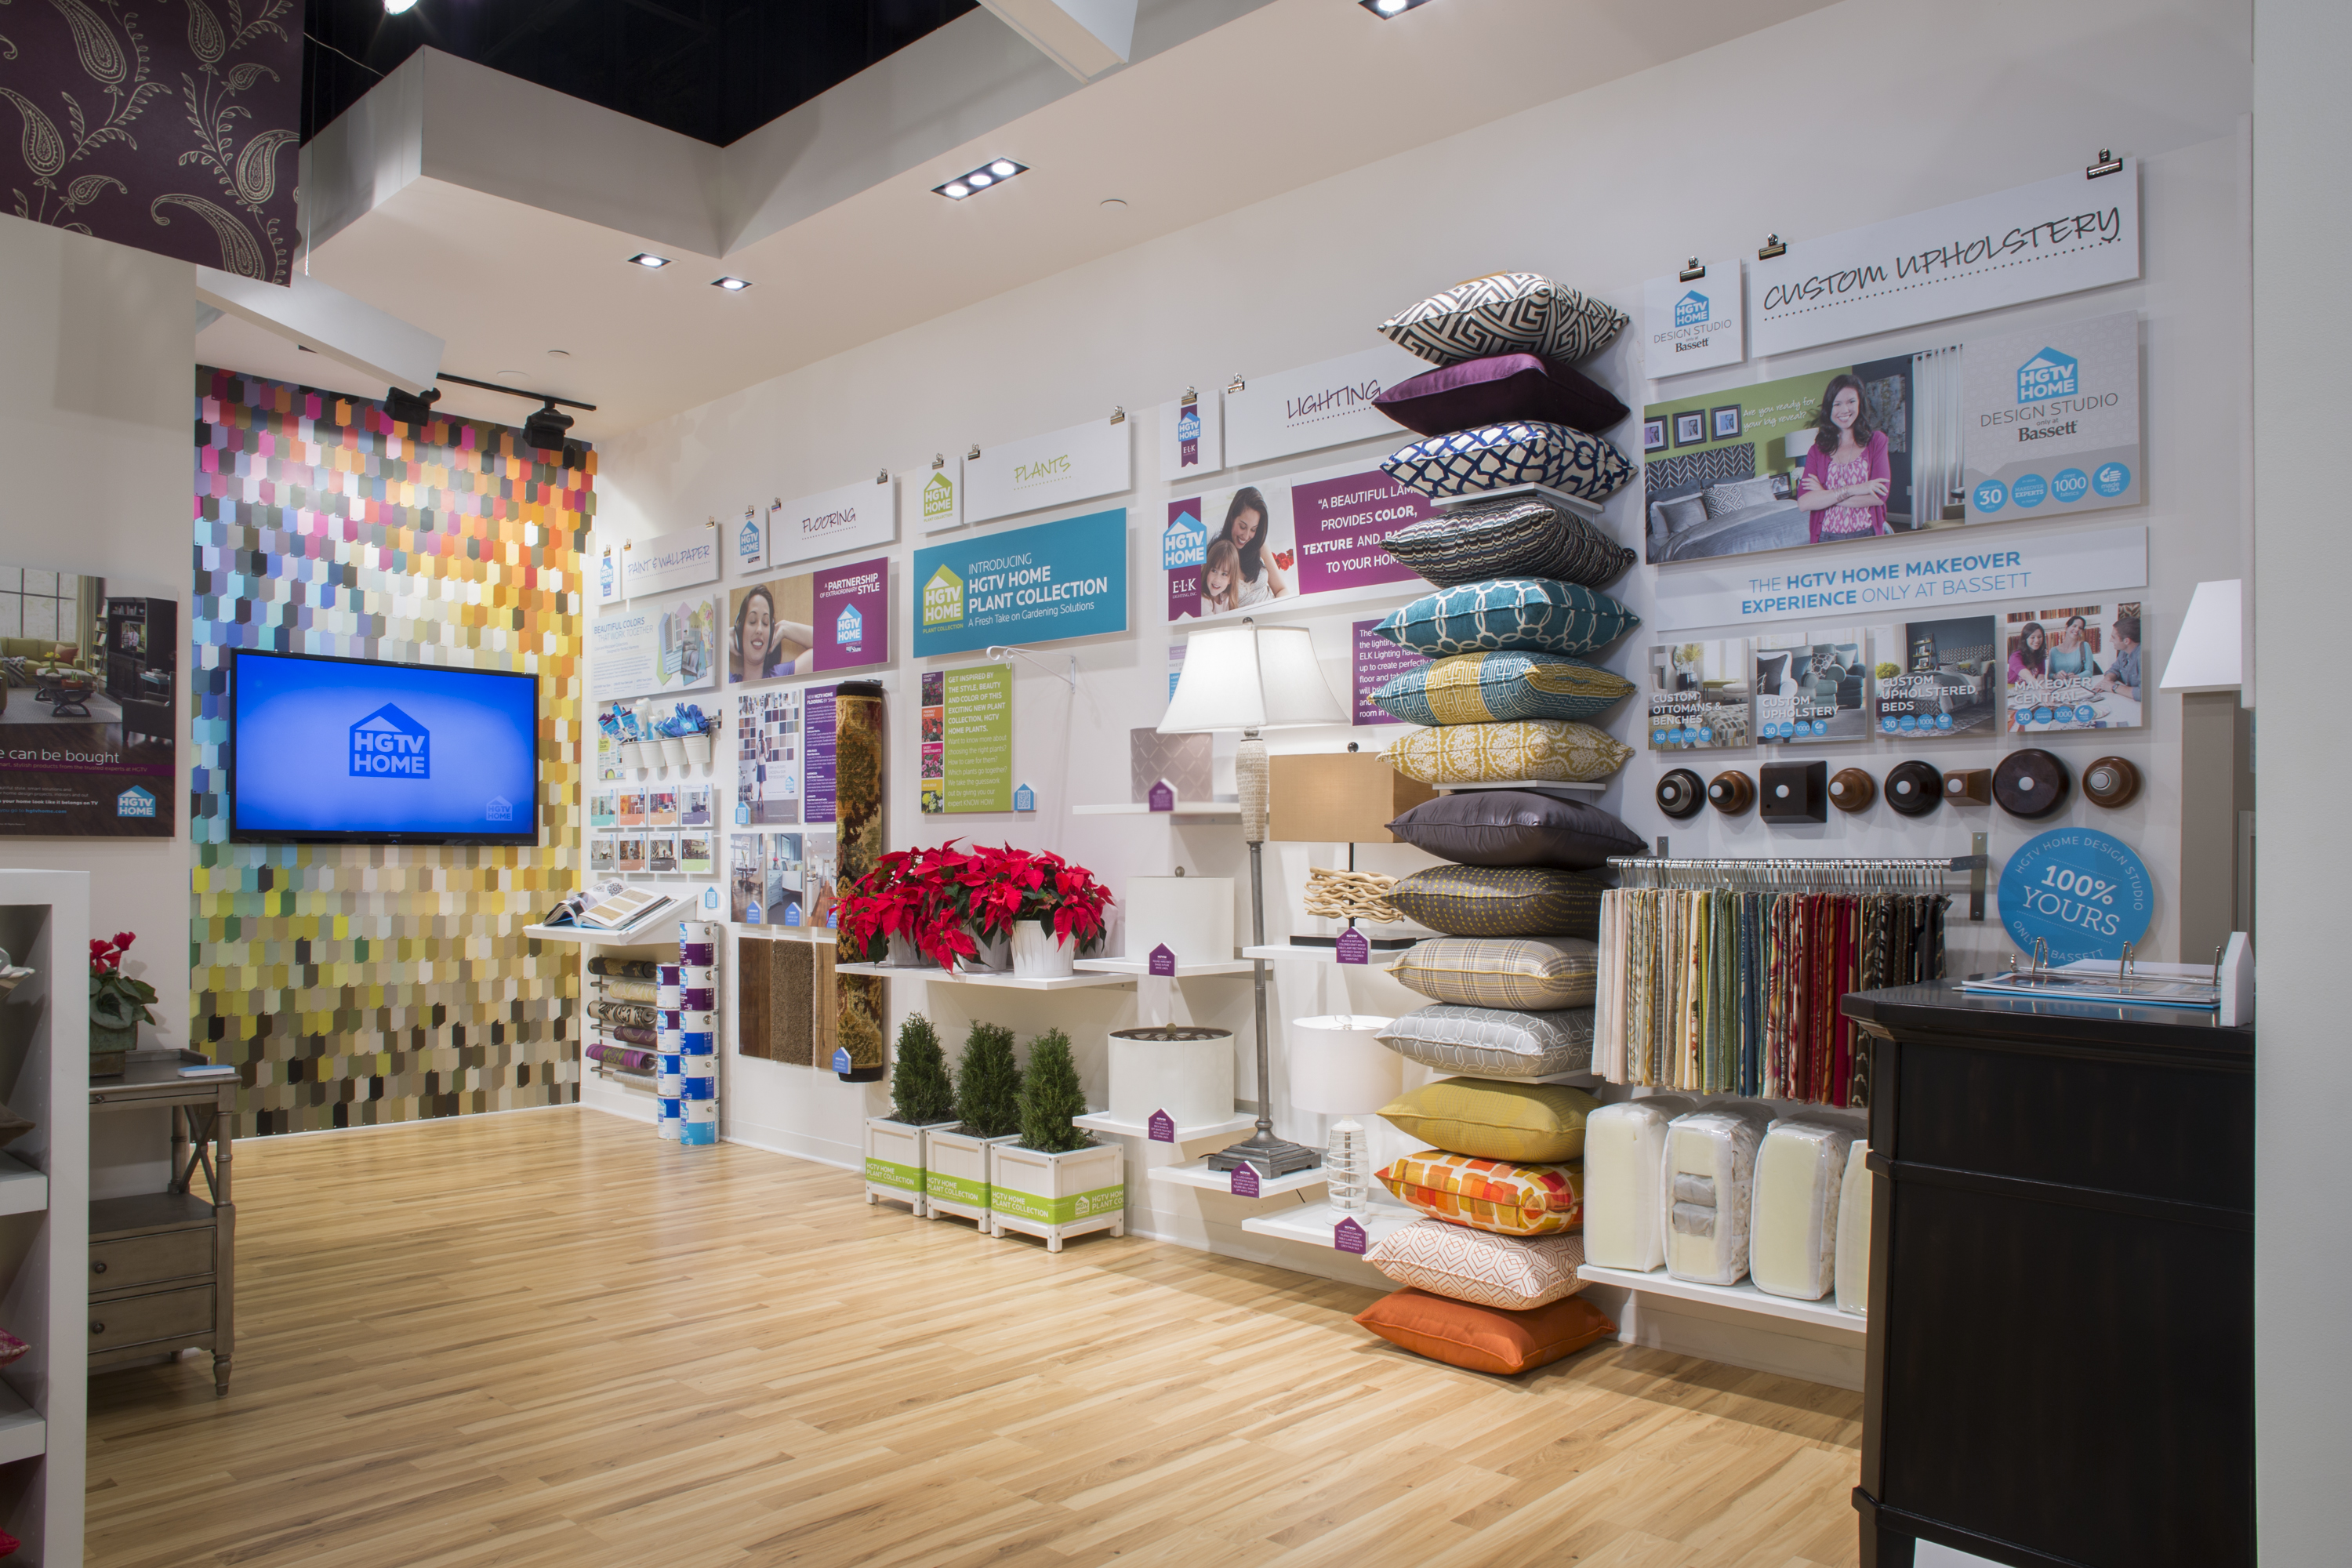 Hgtv Creates Home Pop Up Showroom And Holiday House At Mall